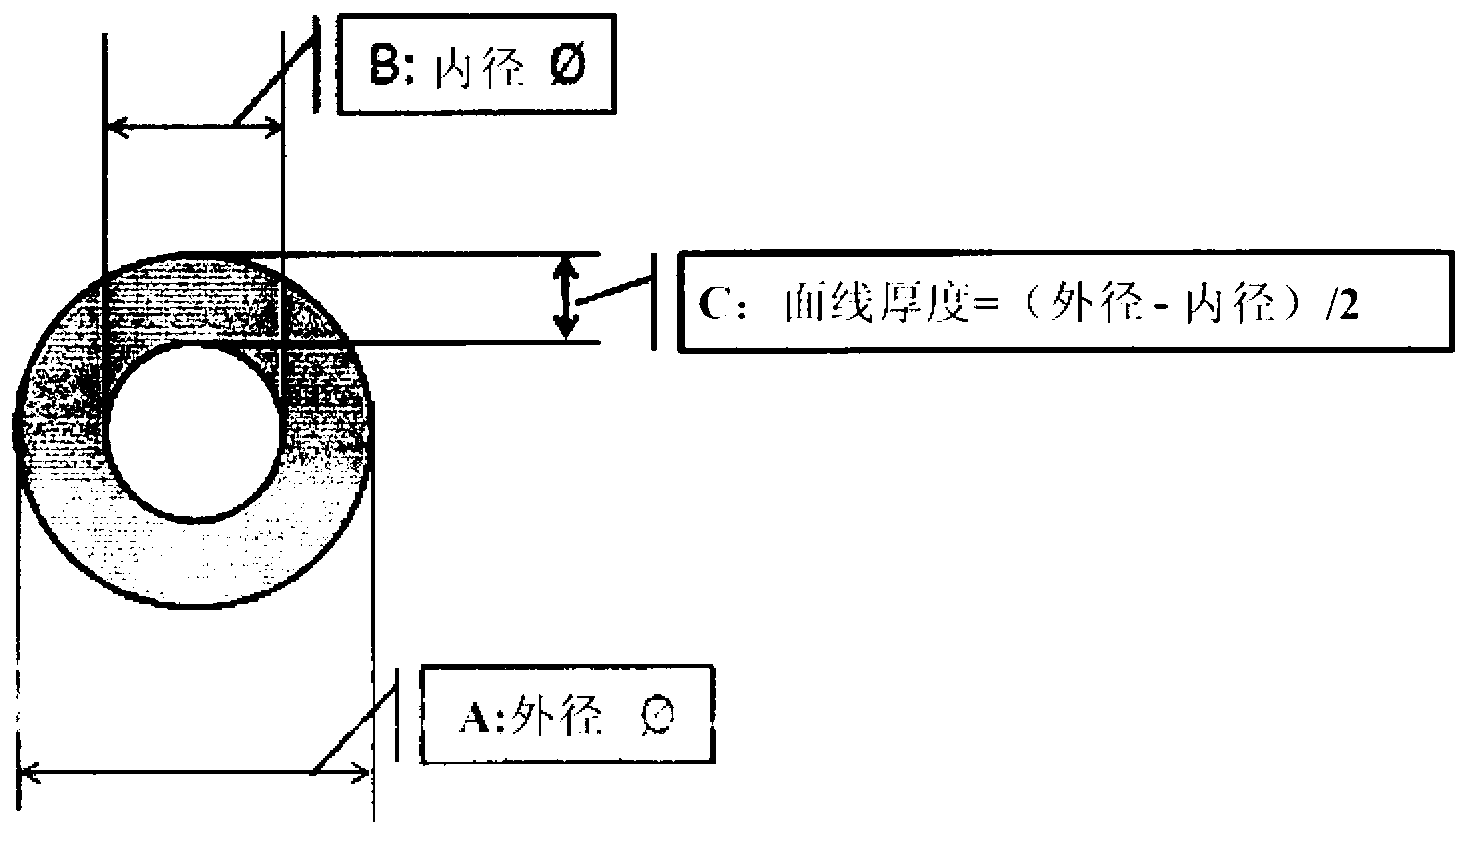 Method for producing hollow noodles